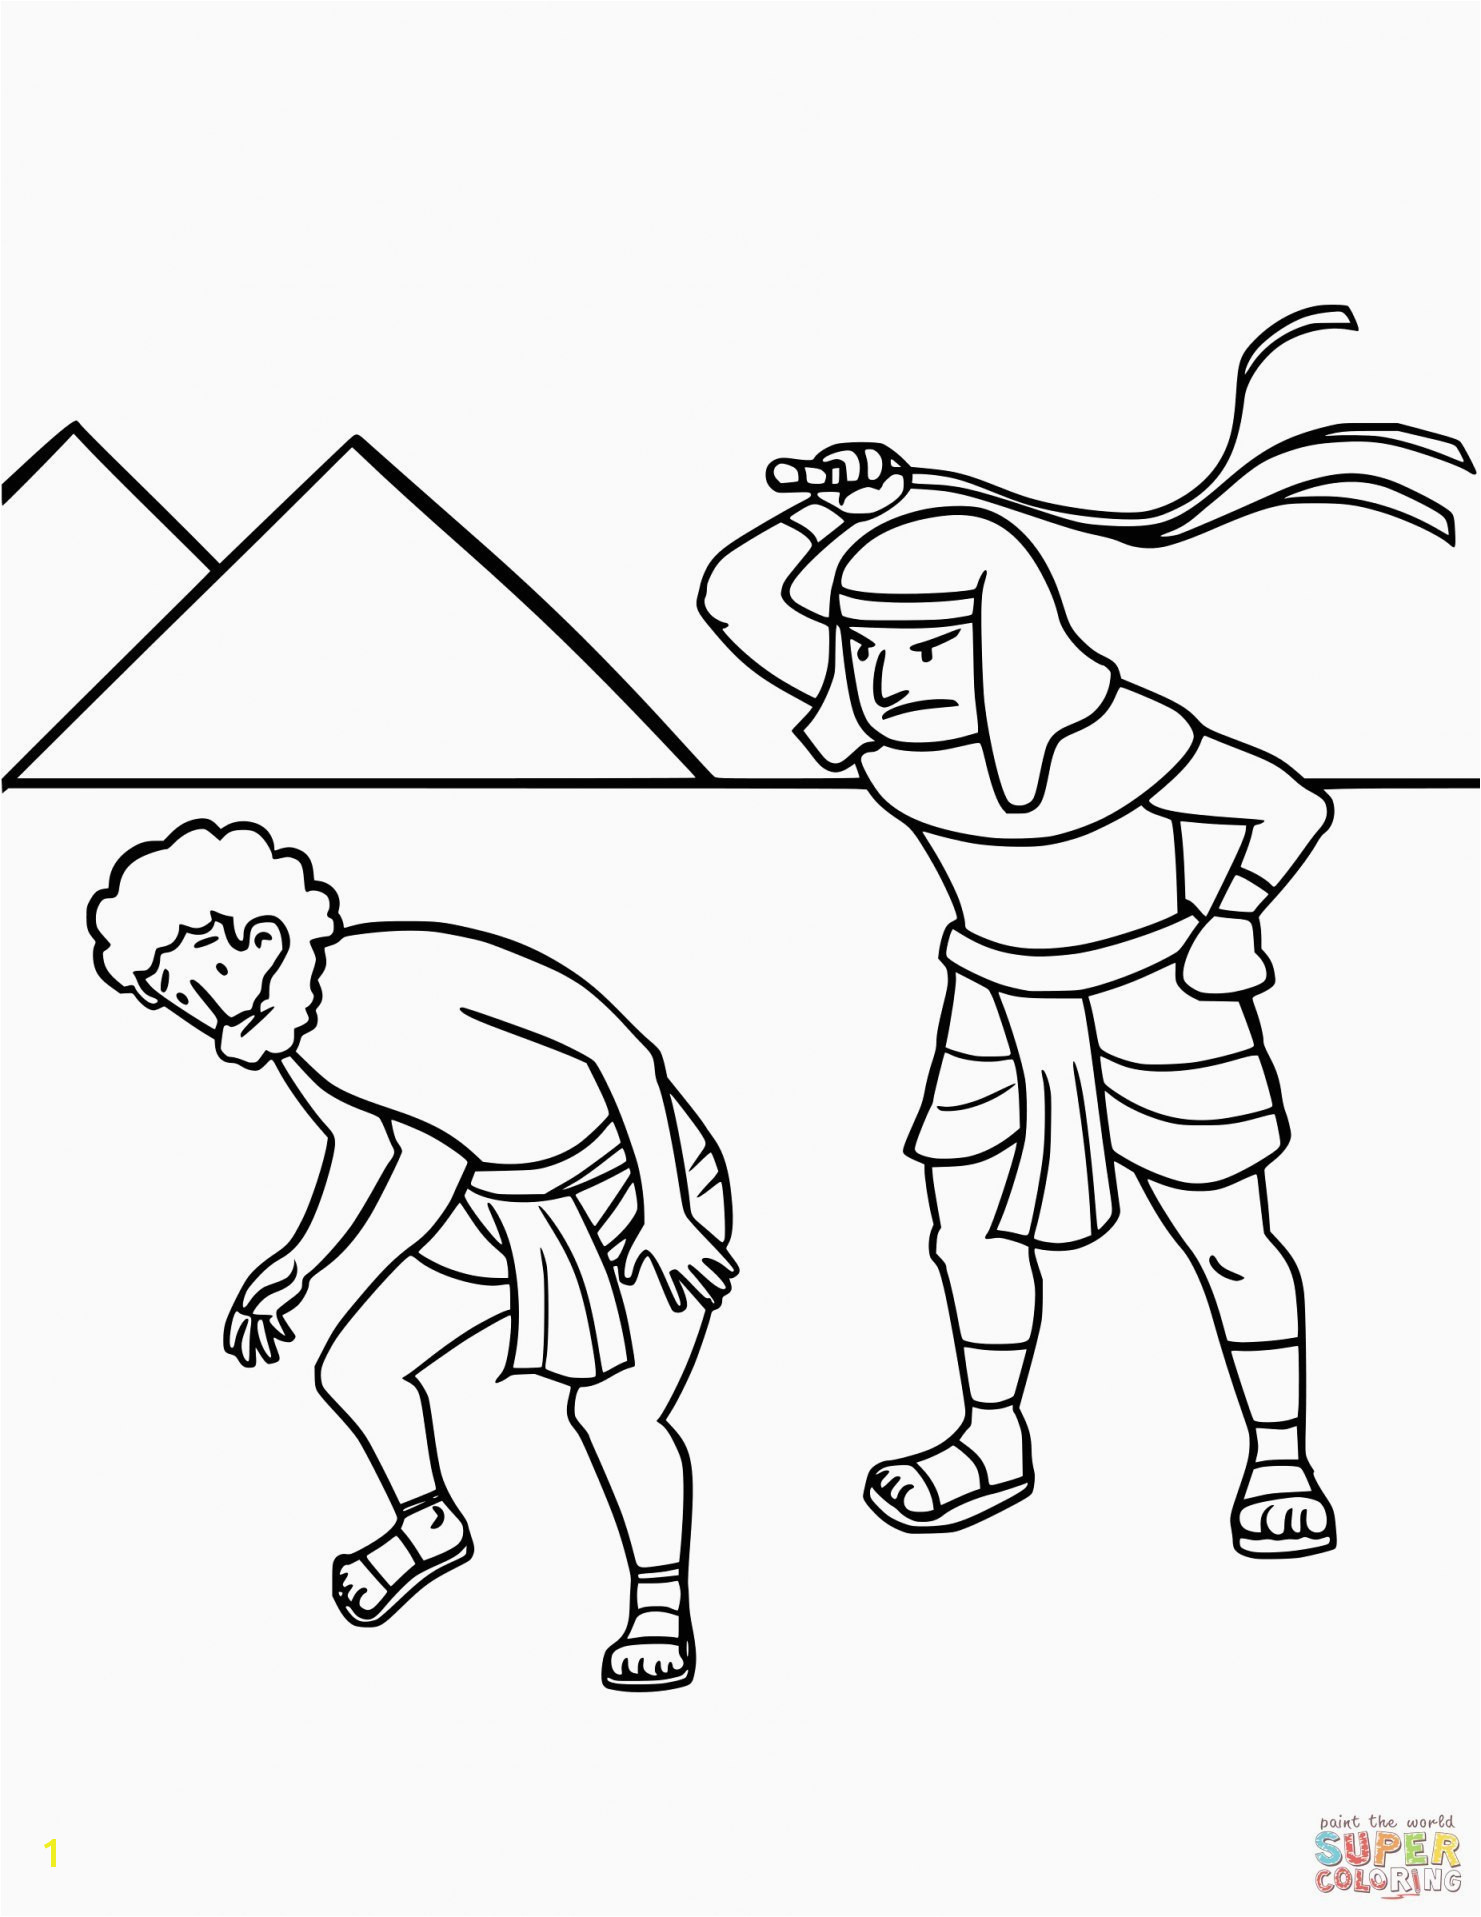 Moses Coloring Pages Fresh Moses Coloring Sheets Luxury 48 Awesome Bible Coloring Pages for